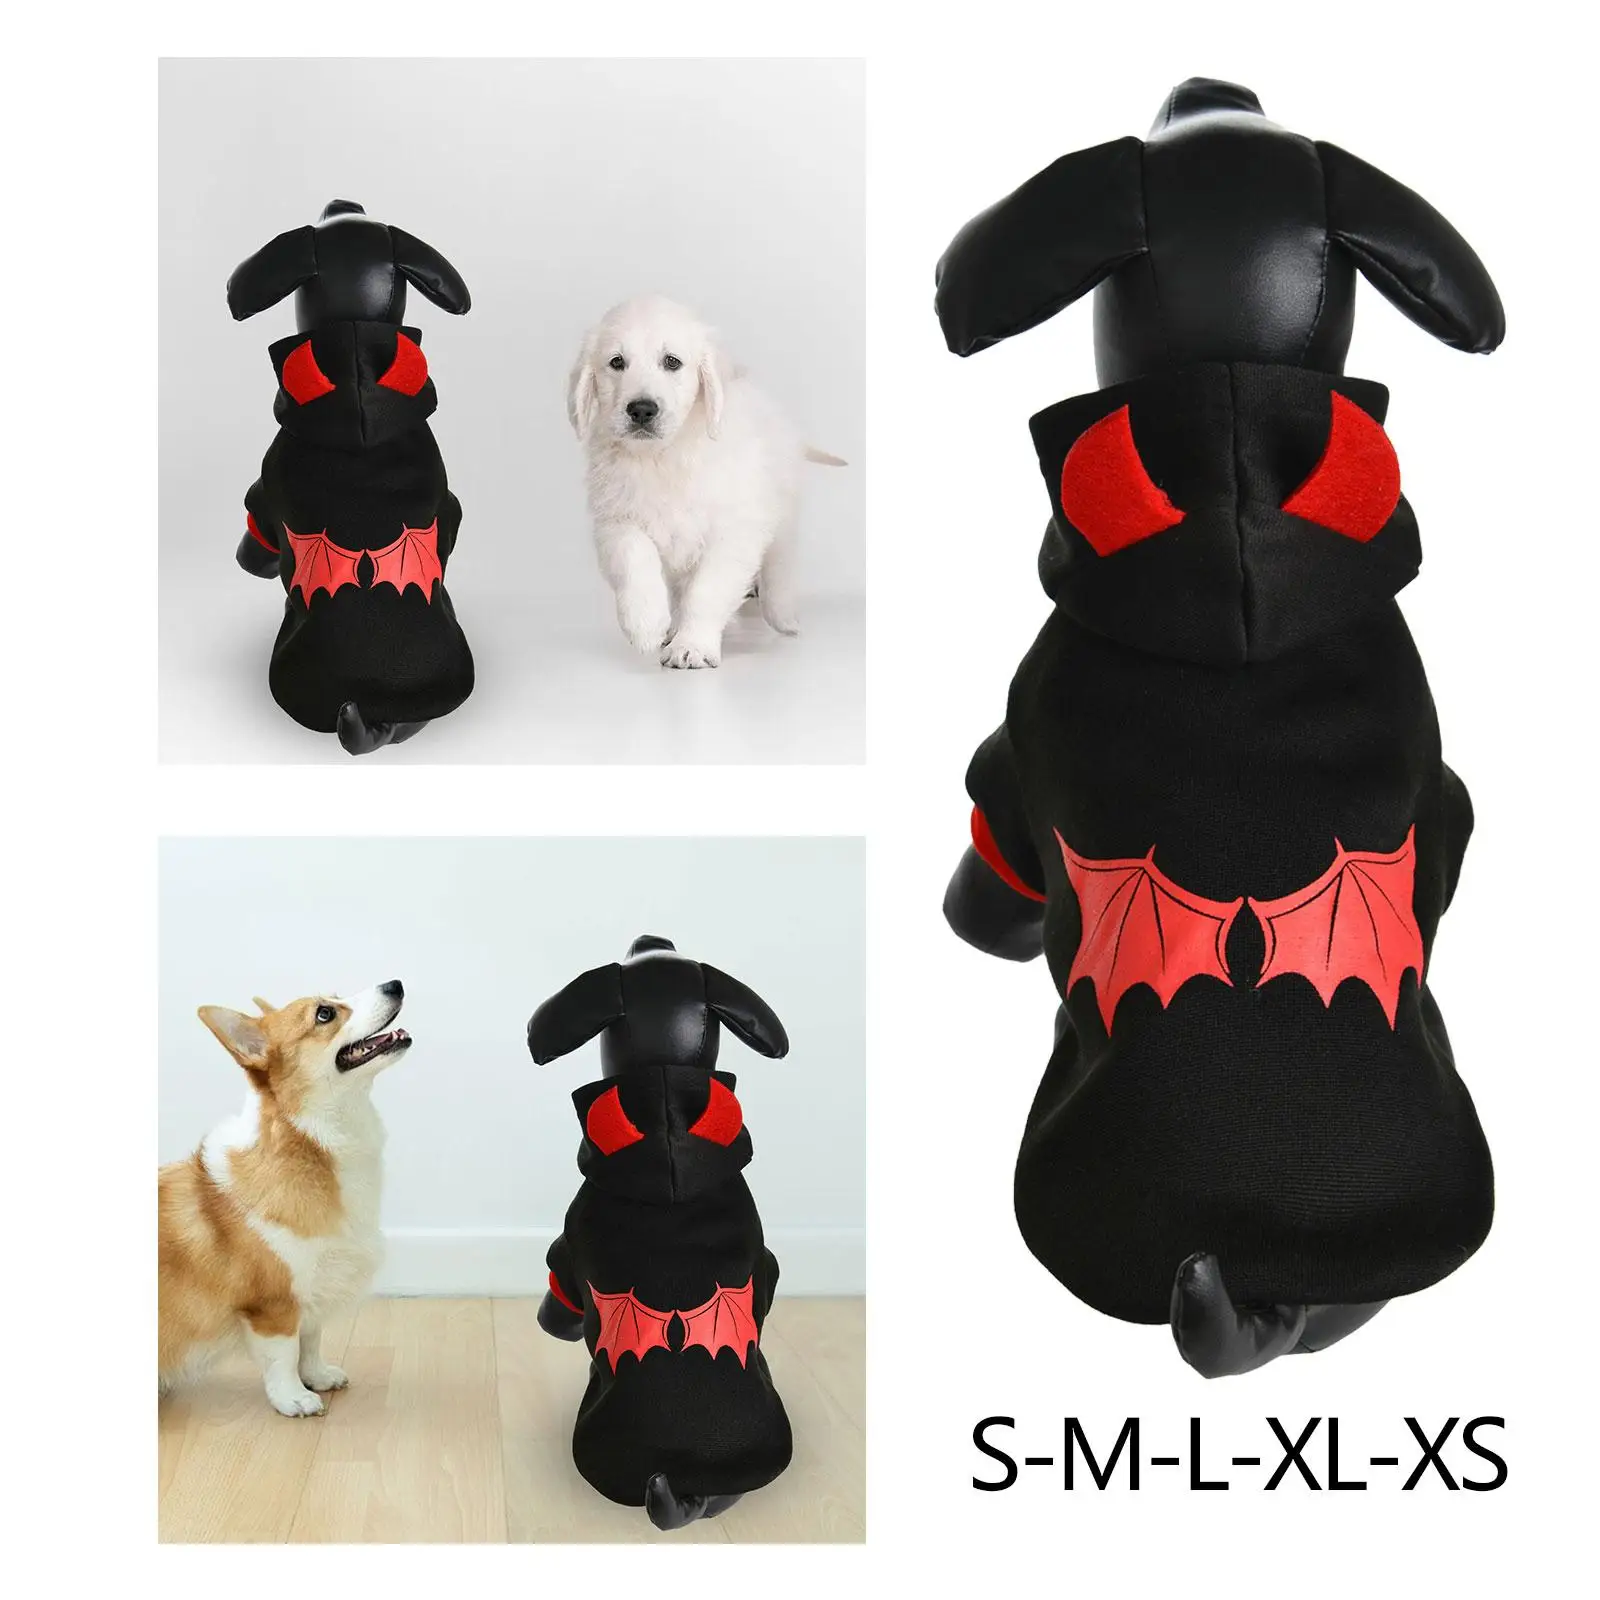 Devil Style Puppy Sweatshirt Animal Autumn Winter Clothes Dress up Pet Cosplay Costume for Cats Party Supplies Medium Large Dogs